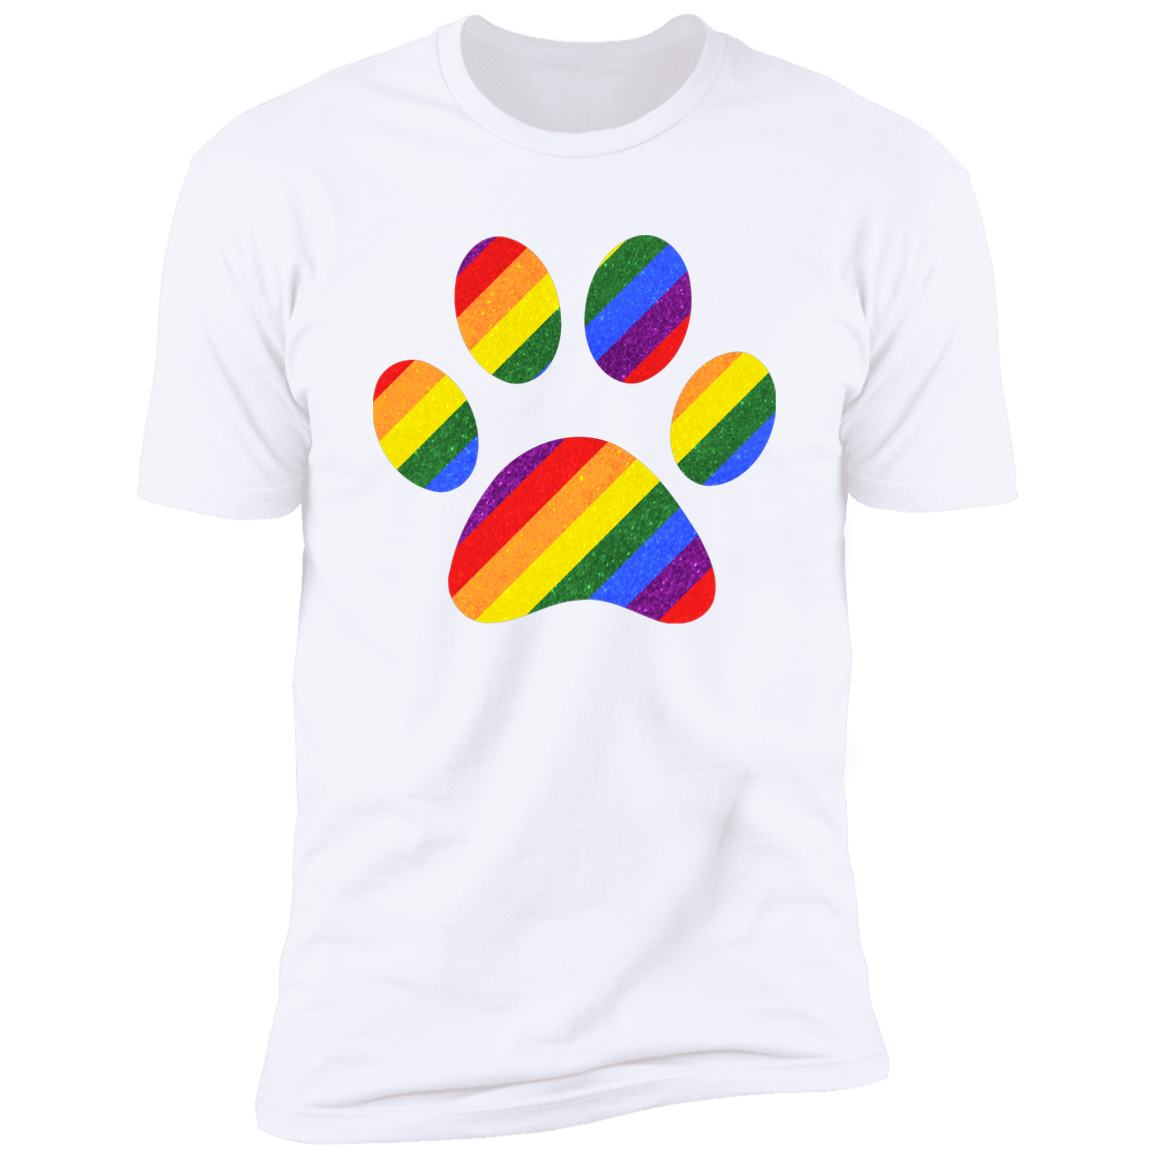 Pride Paw (Sparkles) Pride T-shirt, Paw Pride Dog Shirt for humans, in white